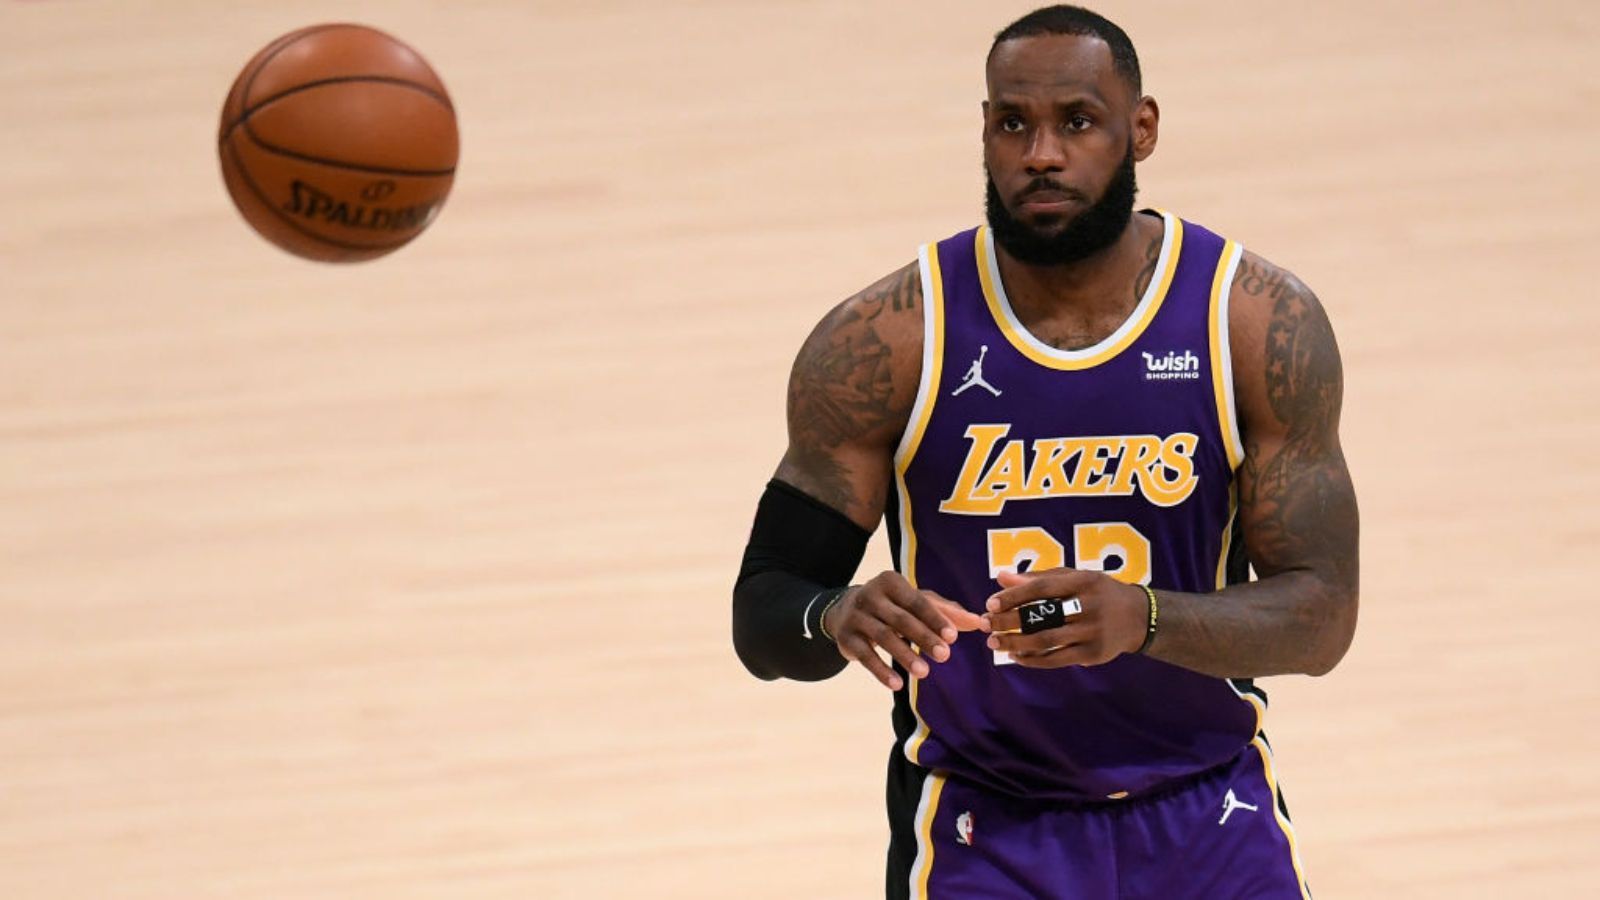 
                <strong>TEAM JAMES: LeBron James (Los Angeles Lakers/Starter)</strong><br>
                 - Punkte: 25,8 - Rebounds: 8,0 - Assists: 7,8 - All-Star-Nominierungen: 17
              